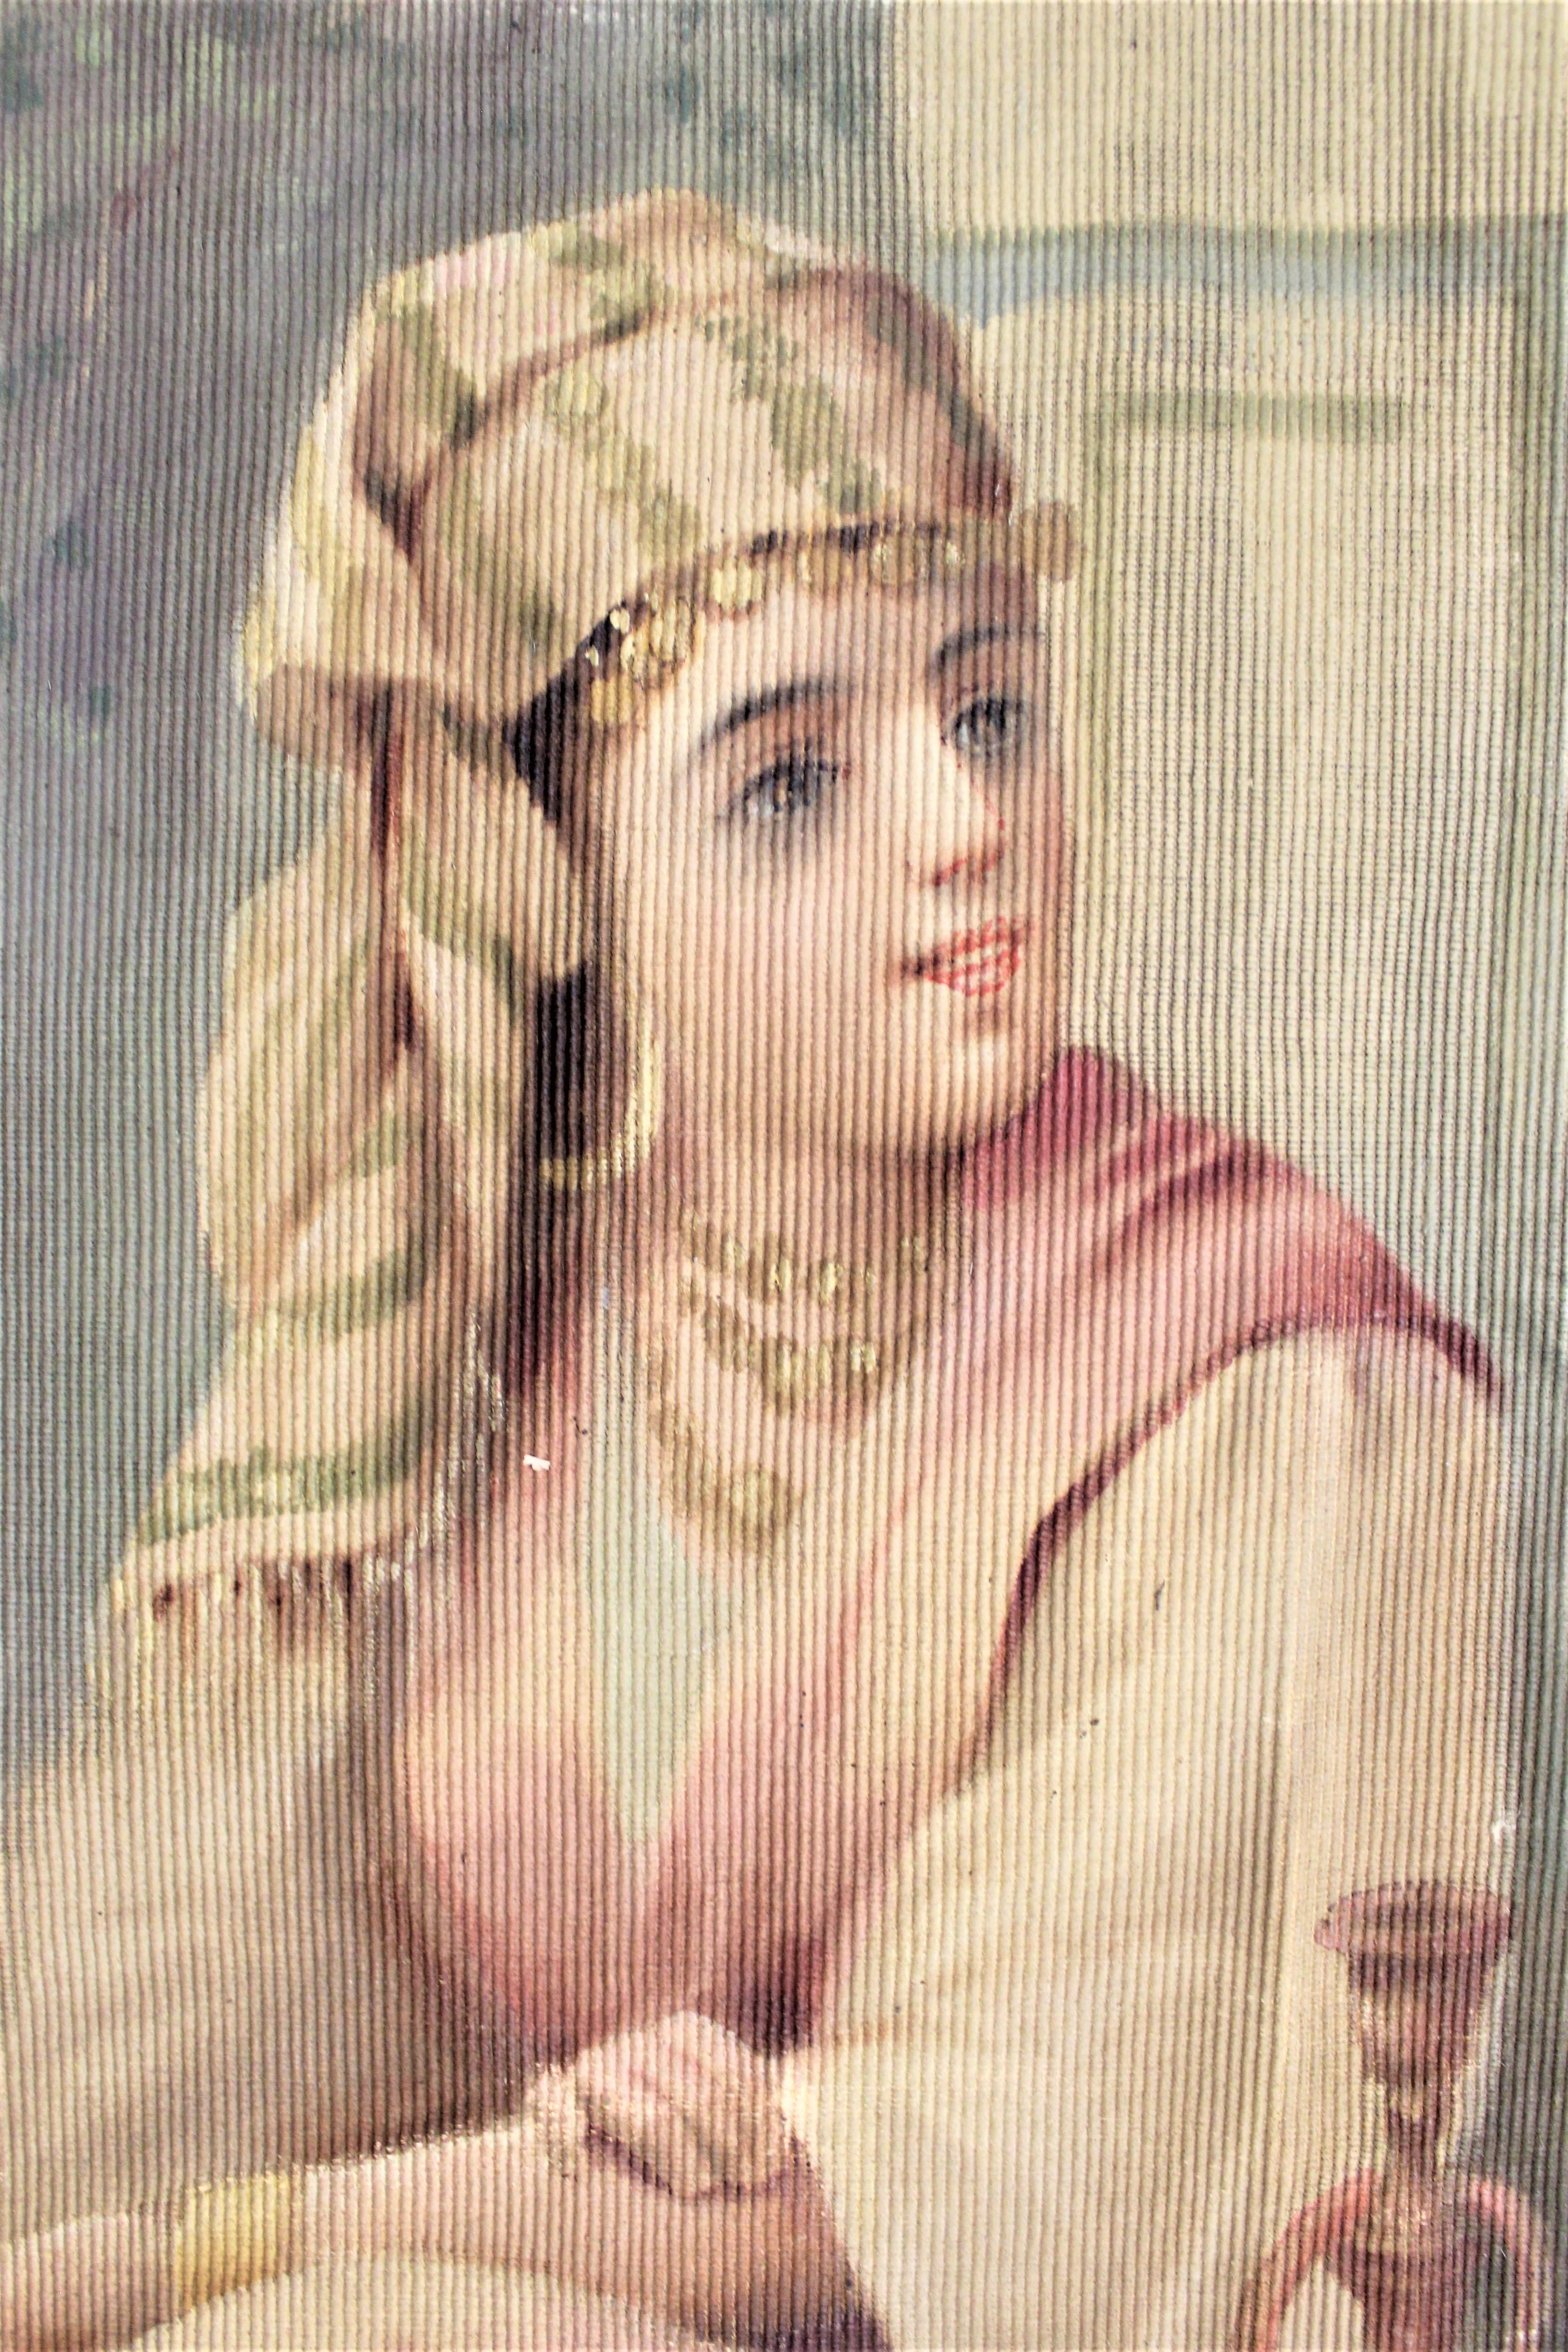 Large Antique Anglo-Indian Painting on Woven Fabric Portraying A Female Dancer In Good Condition For Sale In Hamilton, Ontario